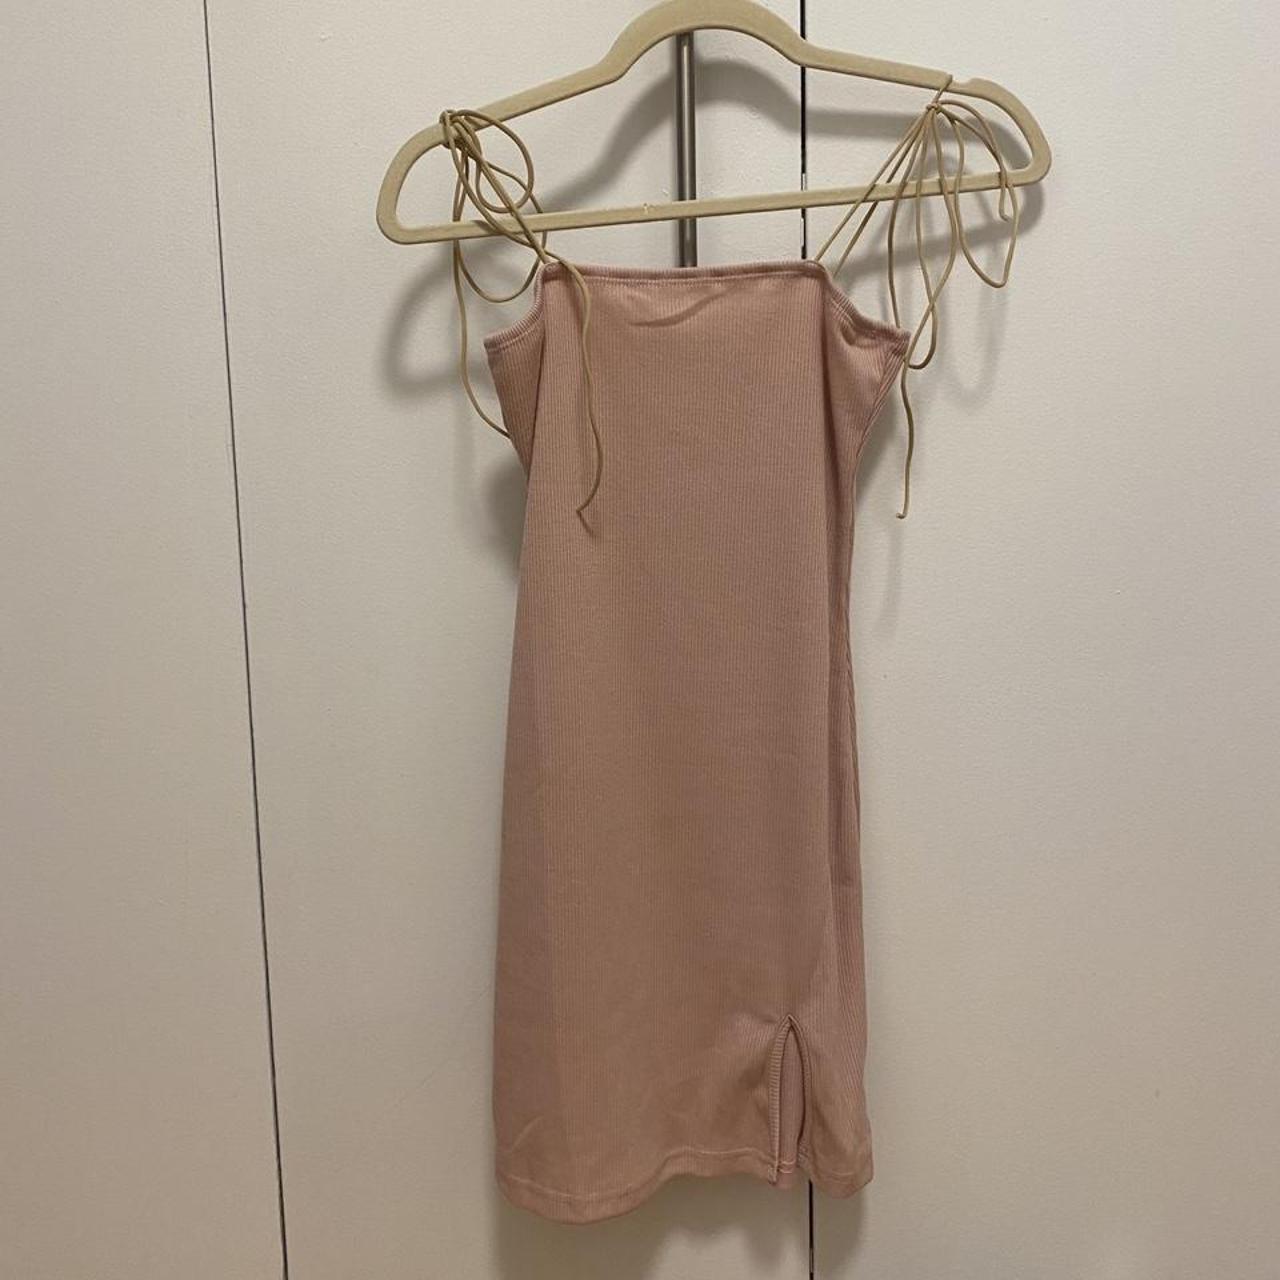 Product Image 3 - Mini dress In pale pink
US